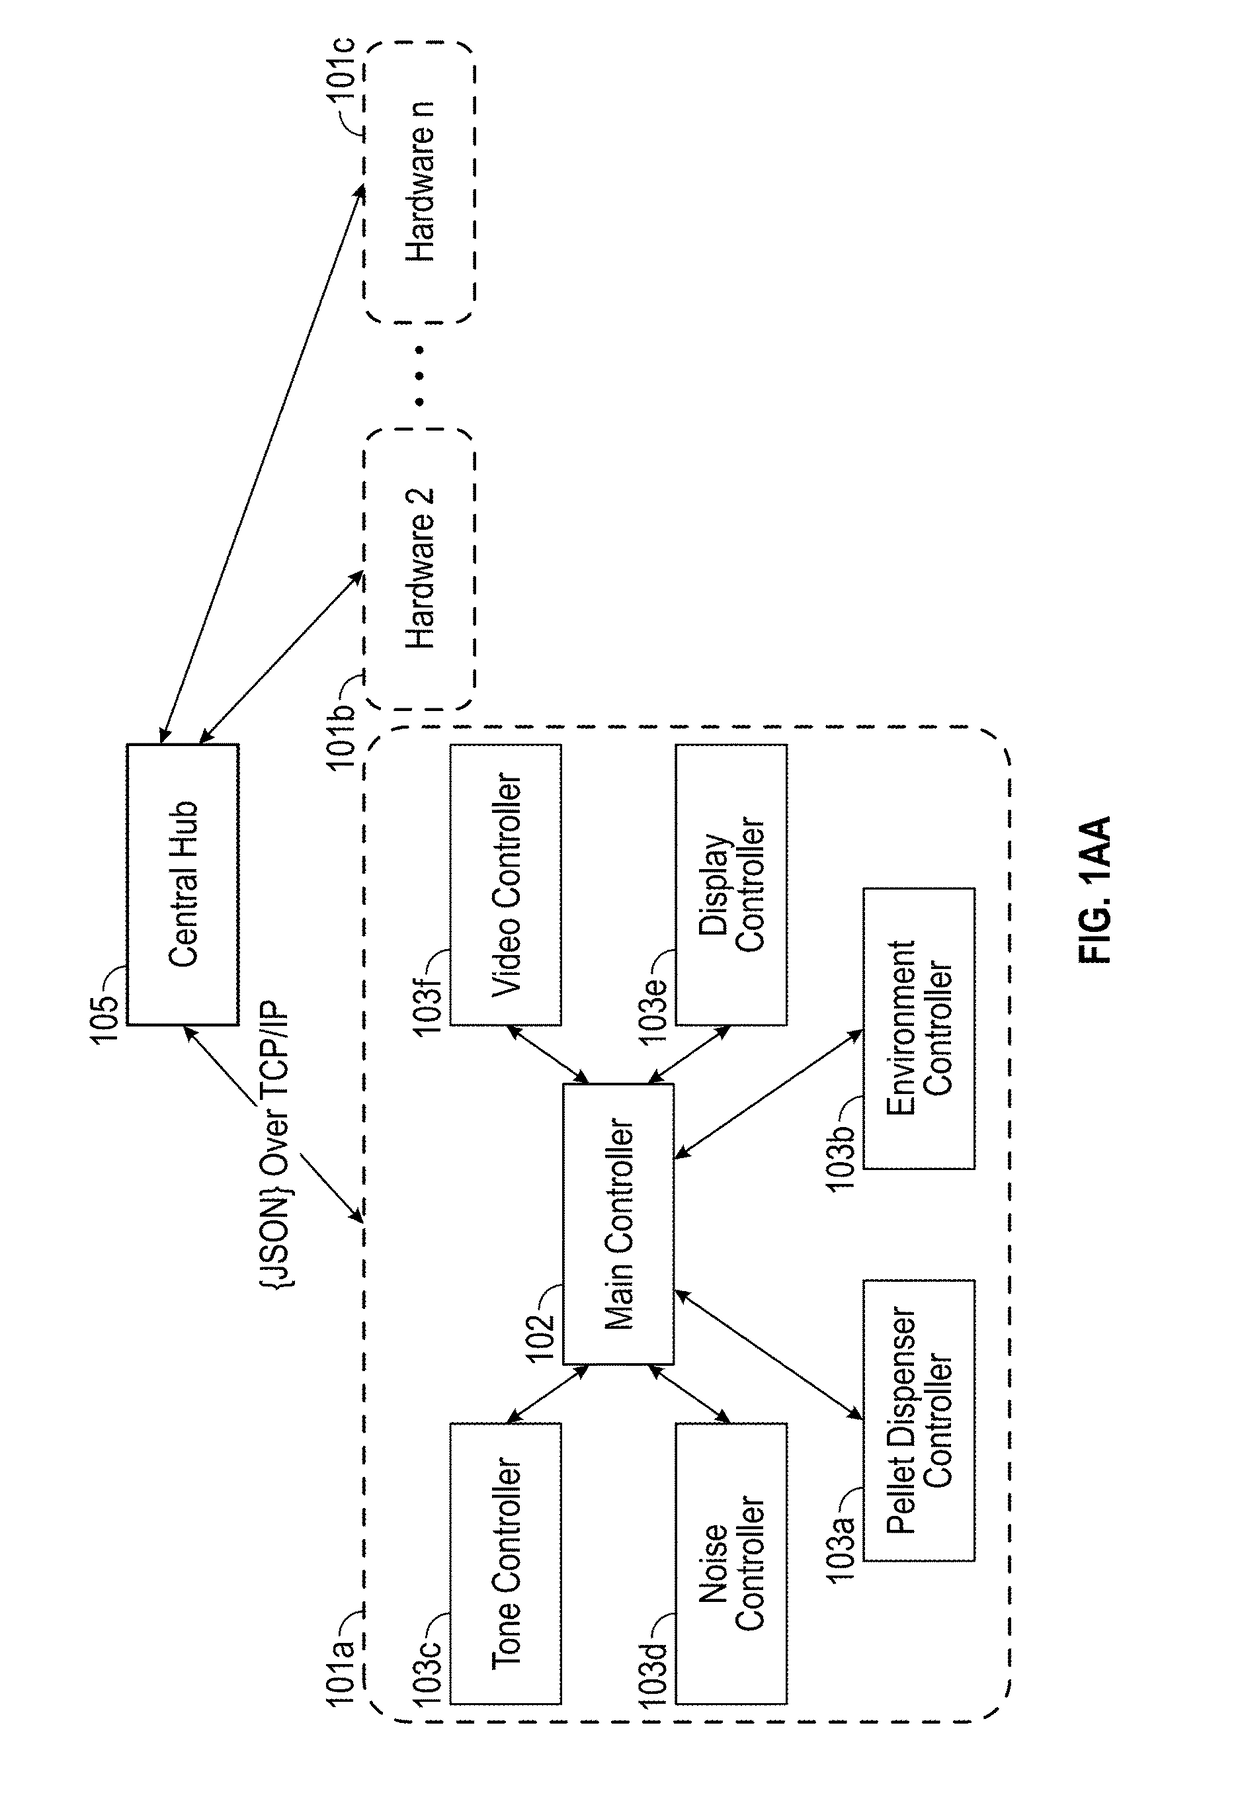 Systems and methods for cognitive testing